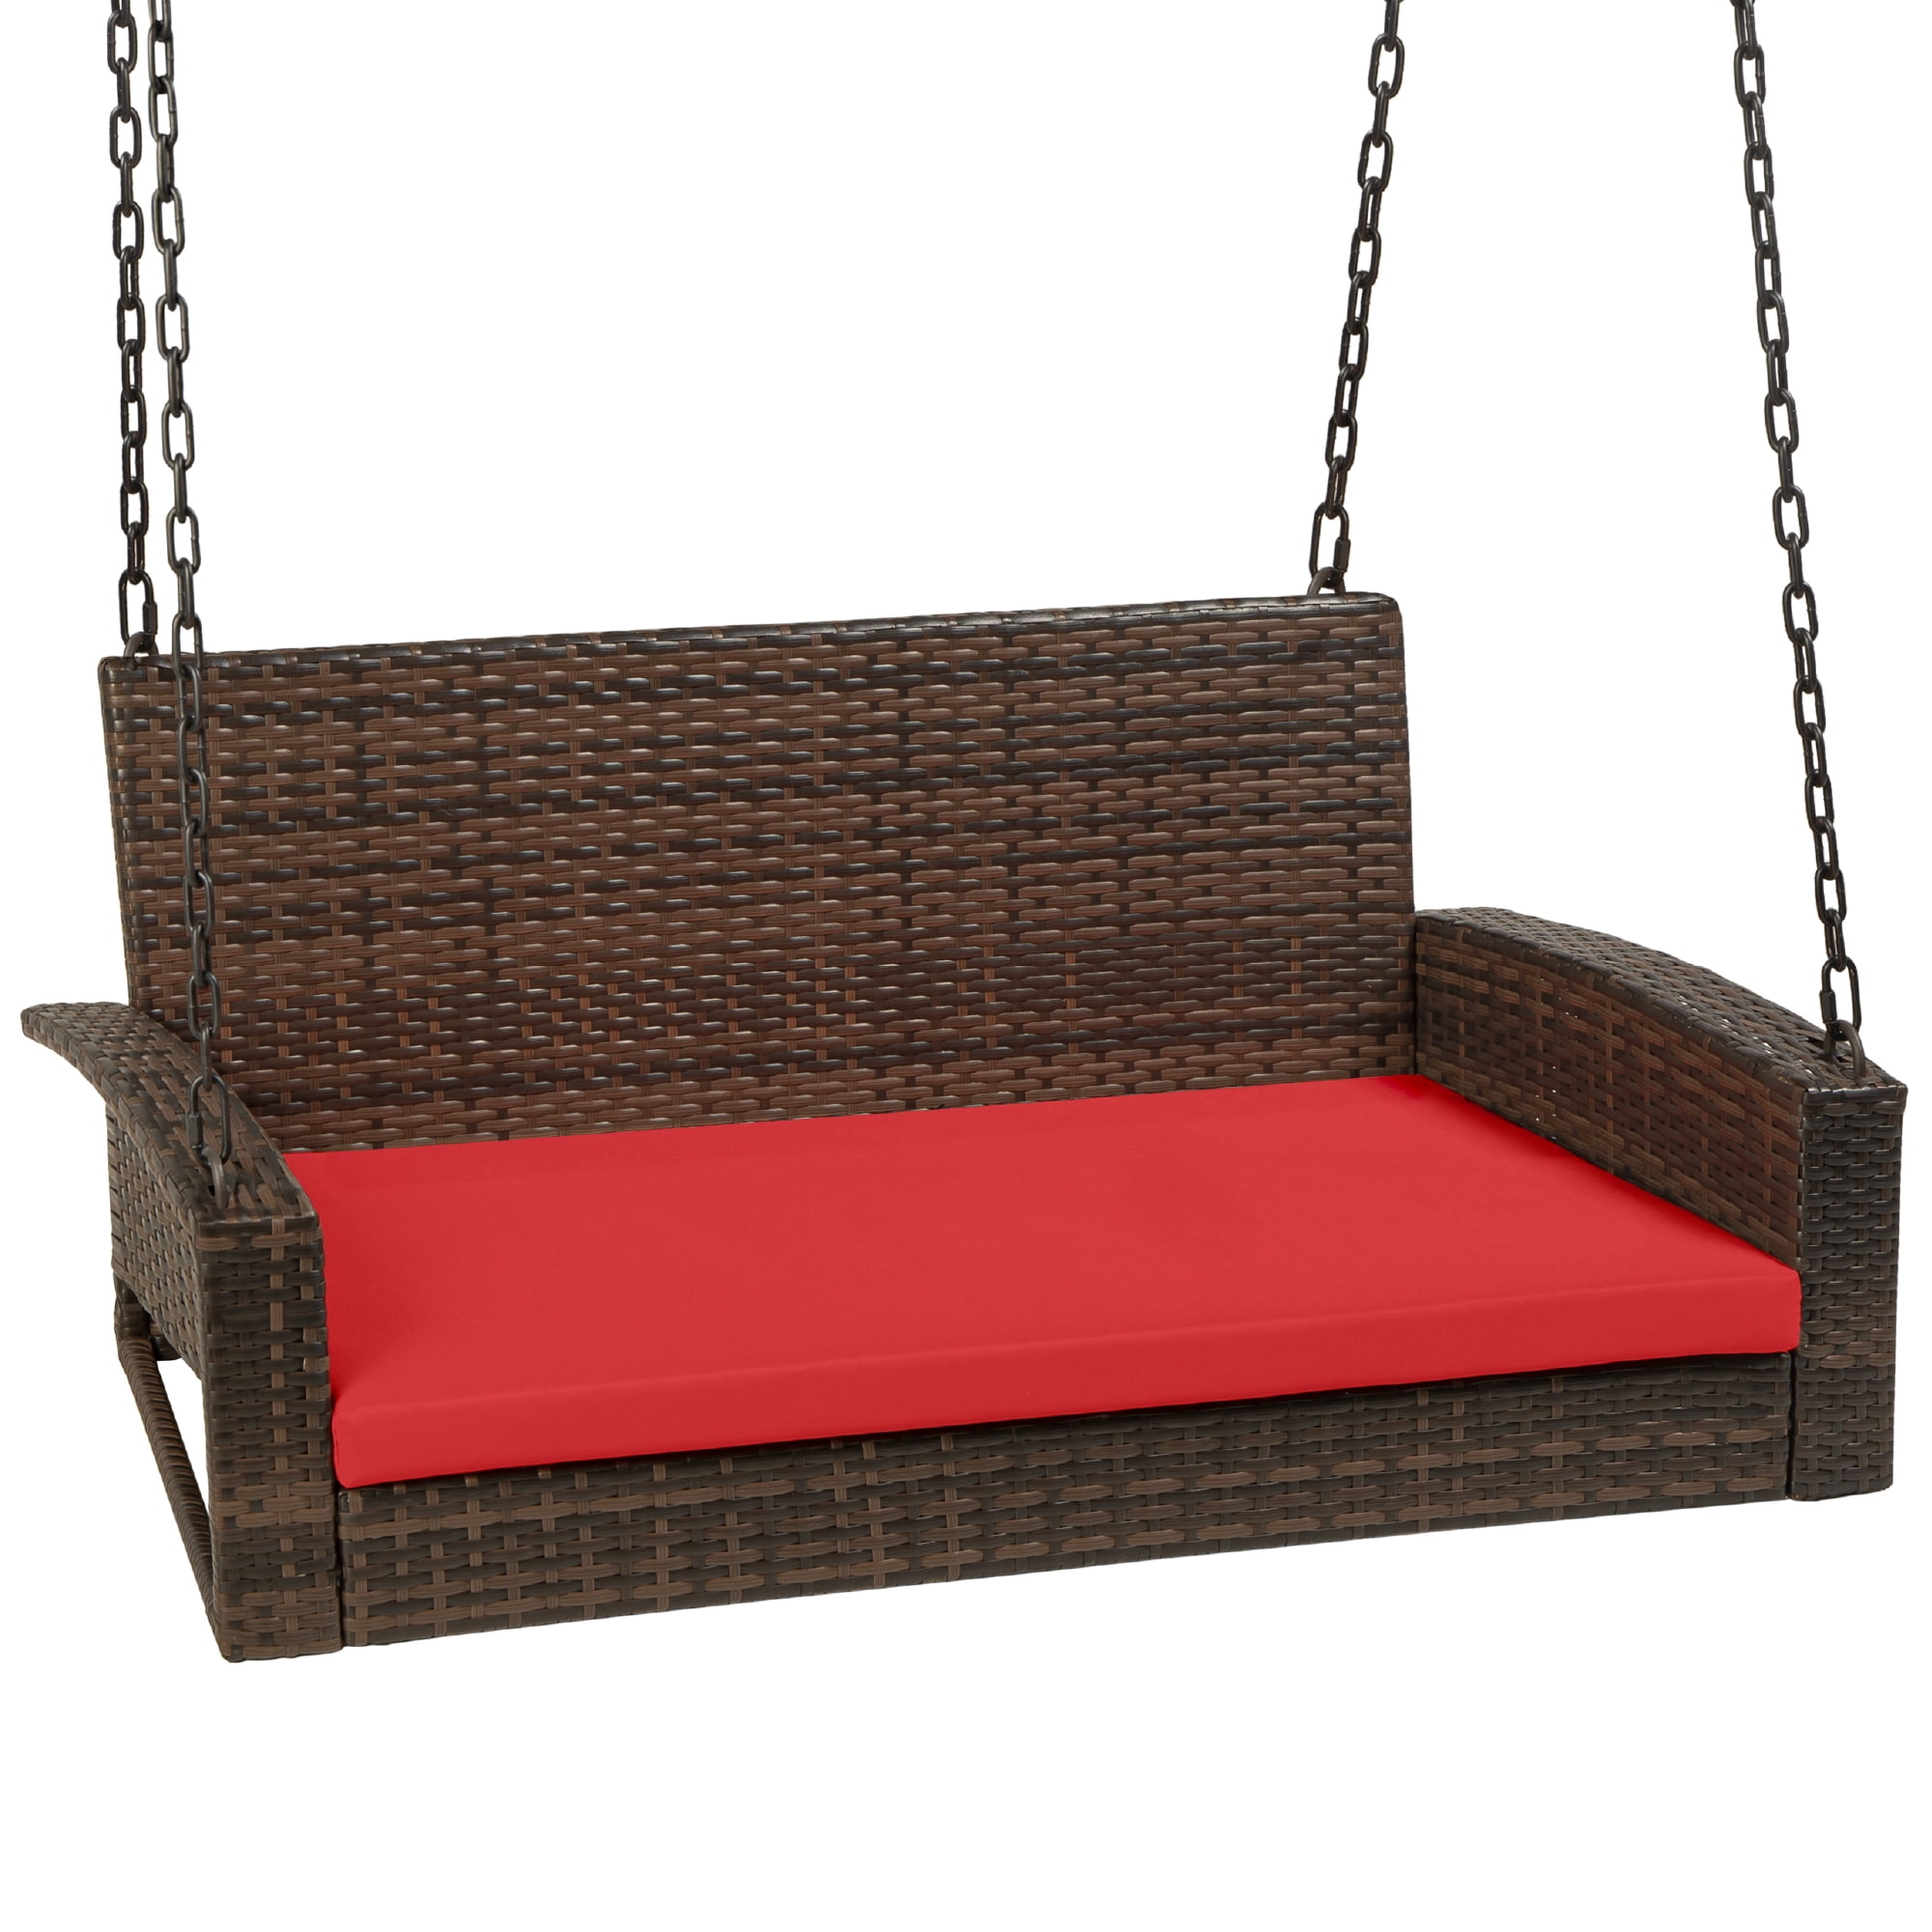 Best Choice Products Woven Wicker Hanging Porch Swing Bench for Patio, Deck  w/ Mounting Chains, Seat Cushion - Brown/Red - Walmart.com